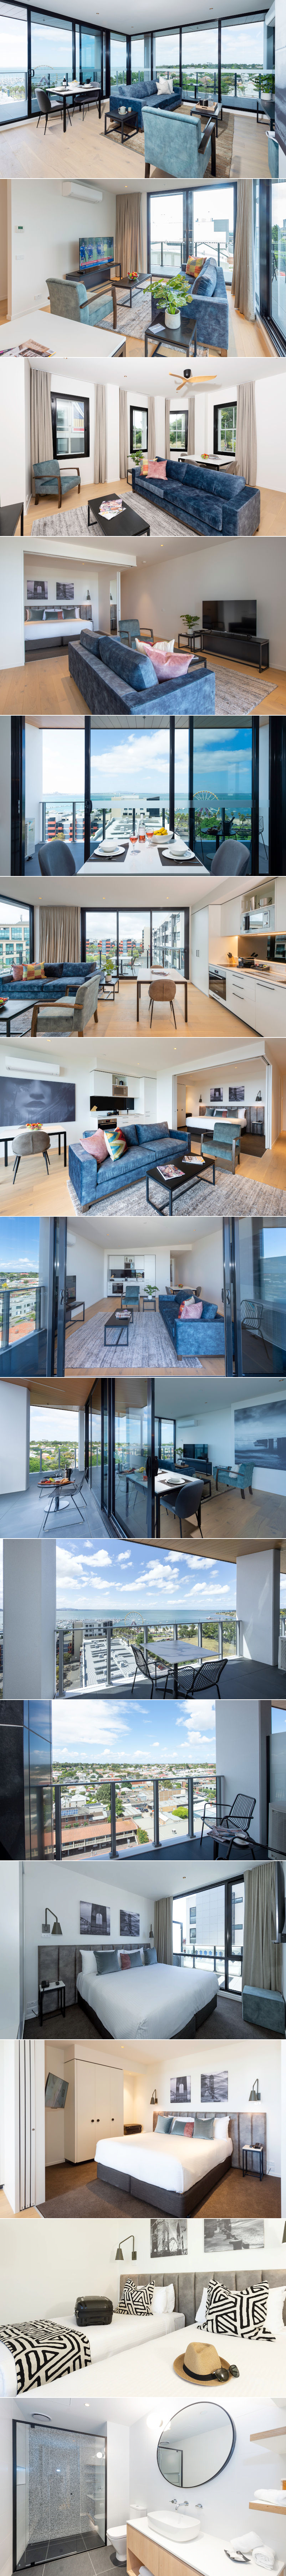 R Hotel Geelong - 1 and 2 bedroom apartments